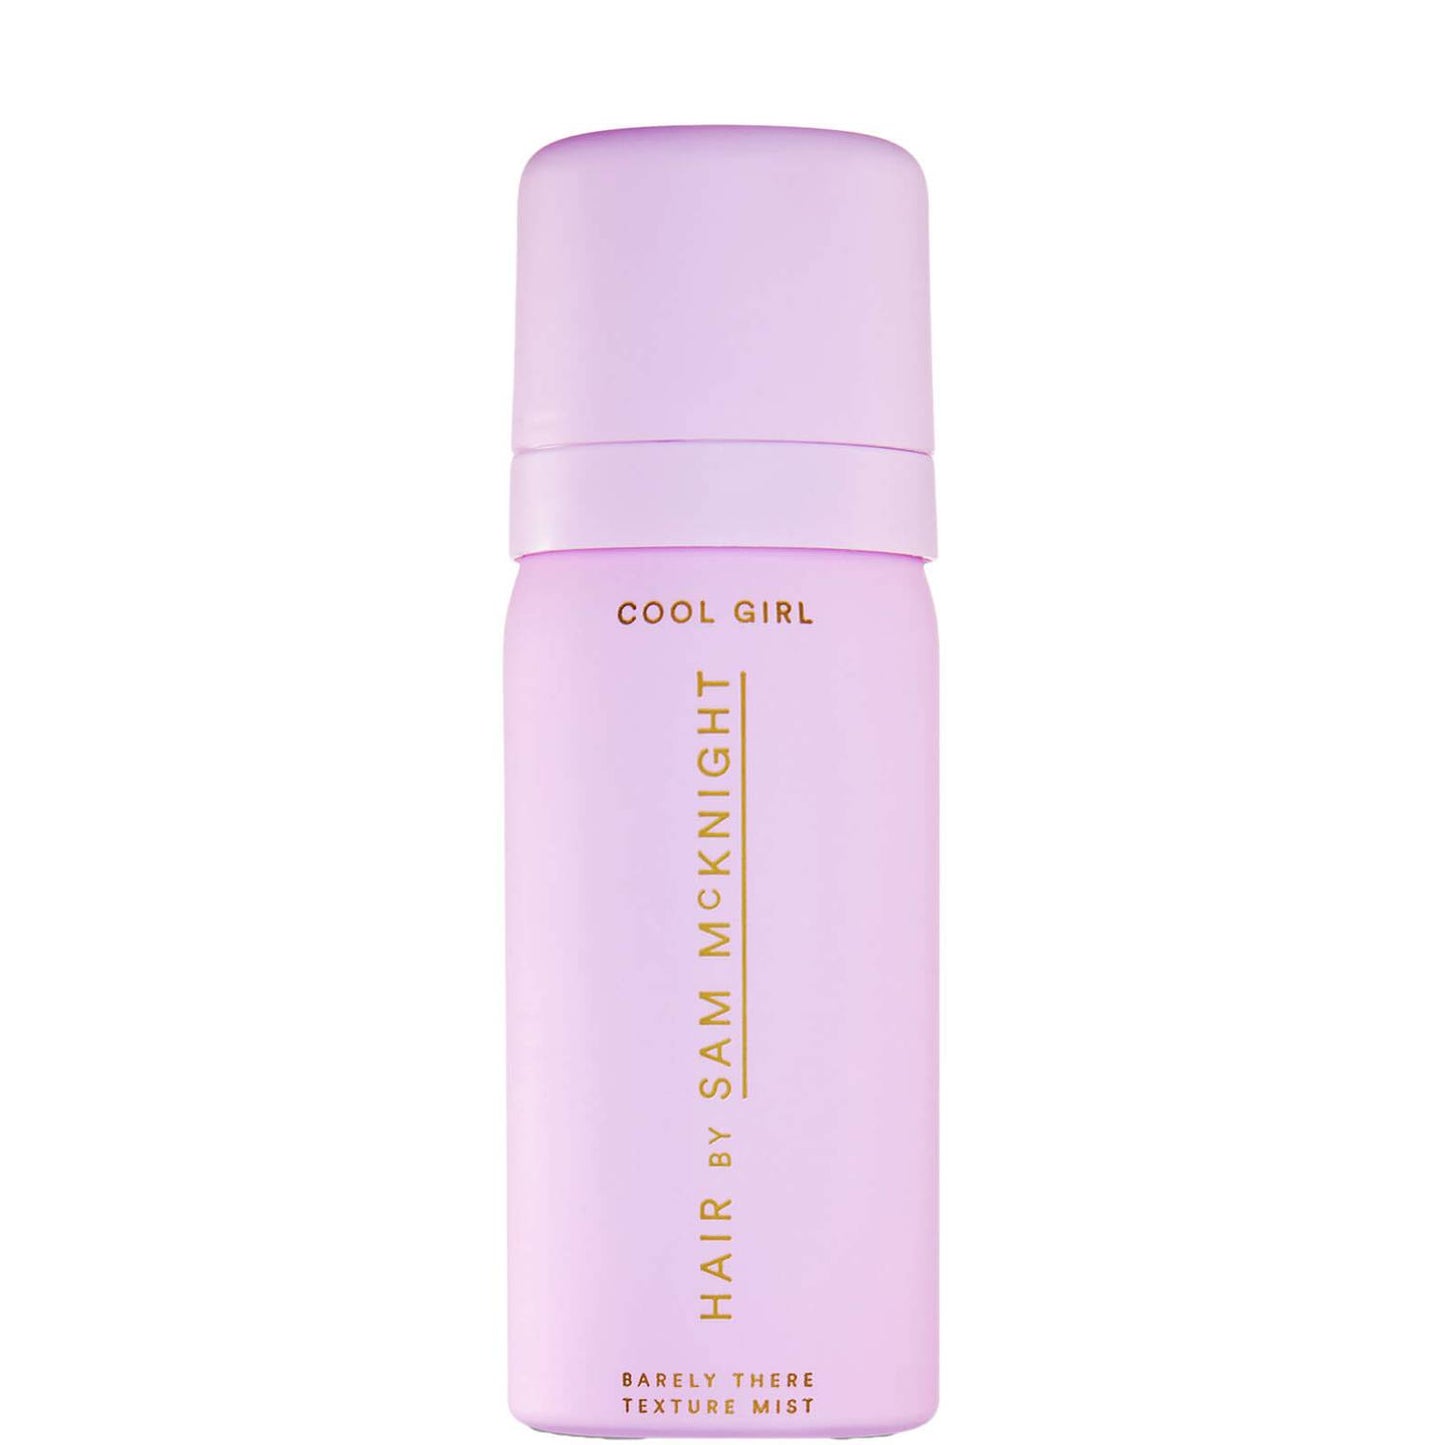 Cool Girl - Barely There Texture Mist 50ml